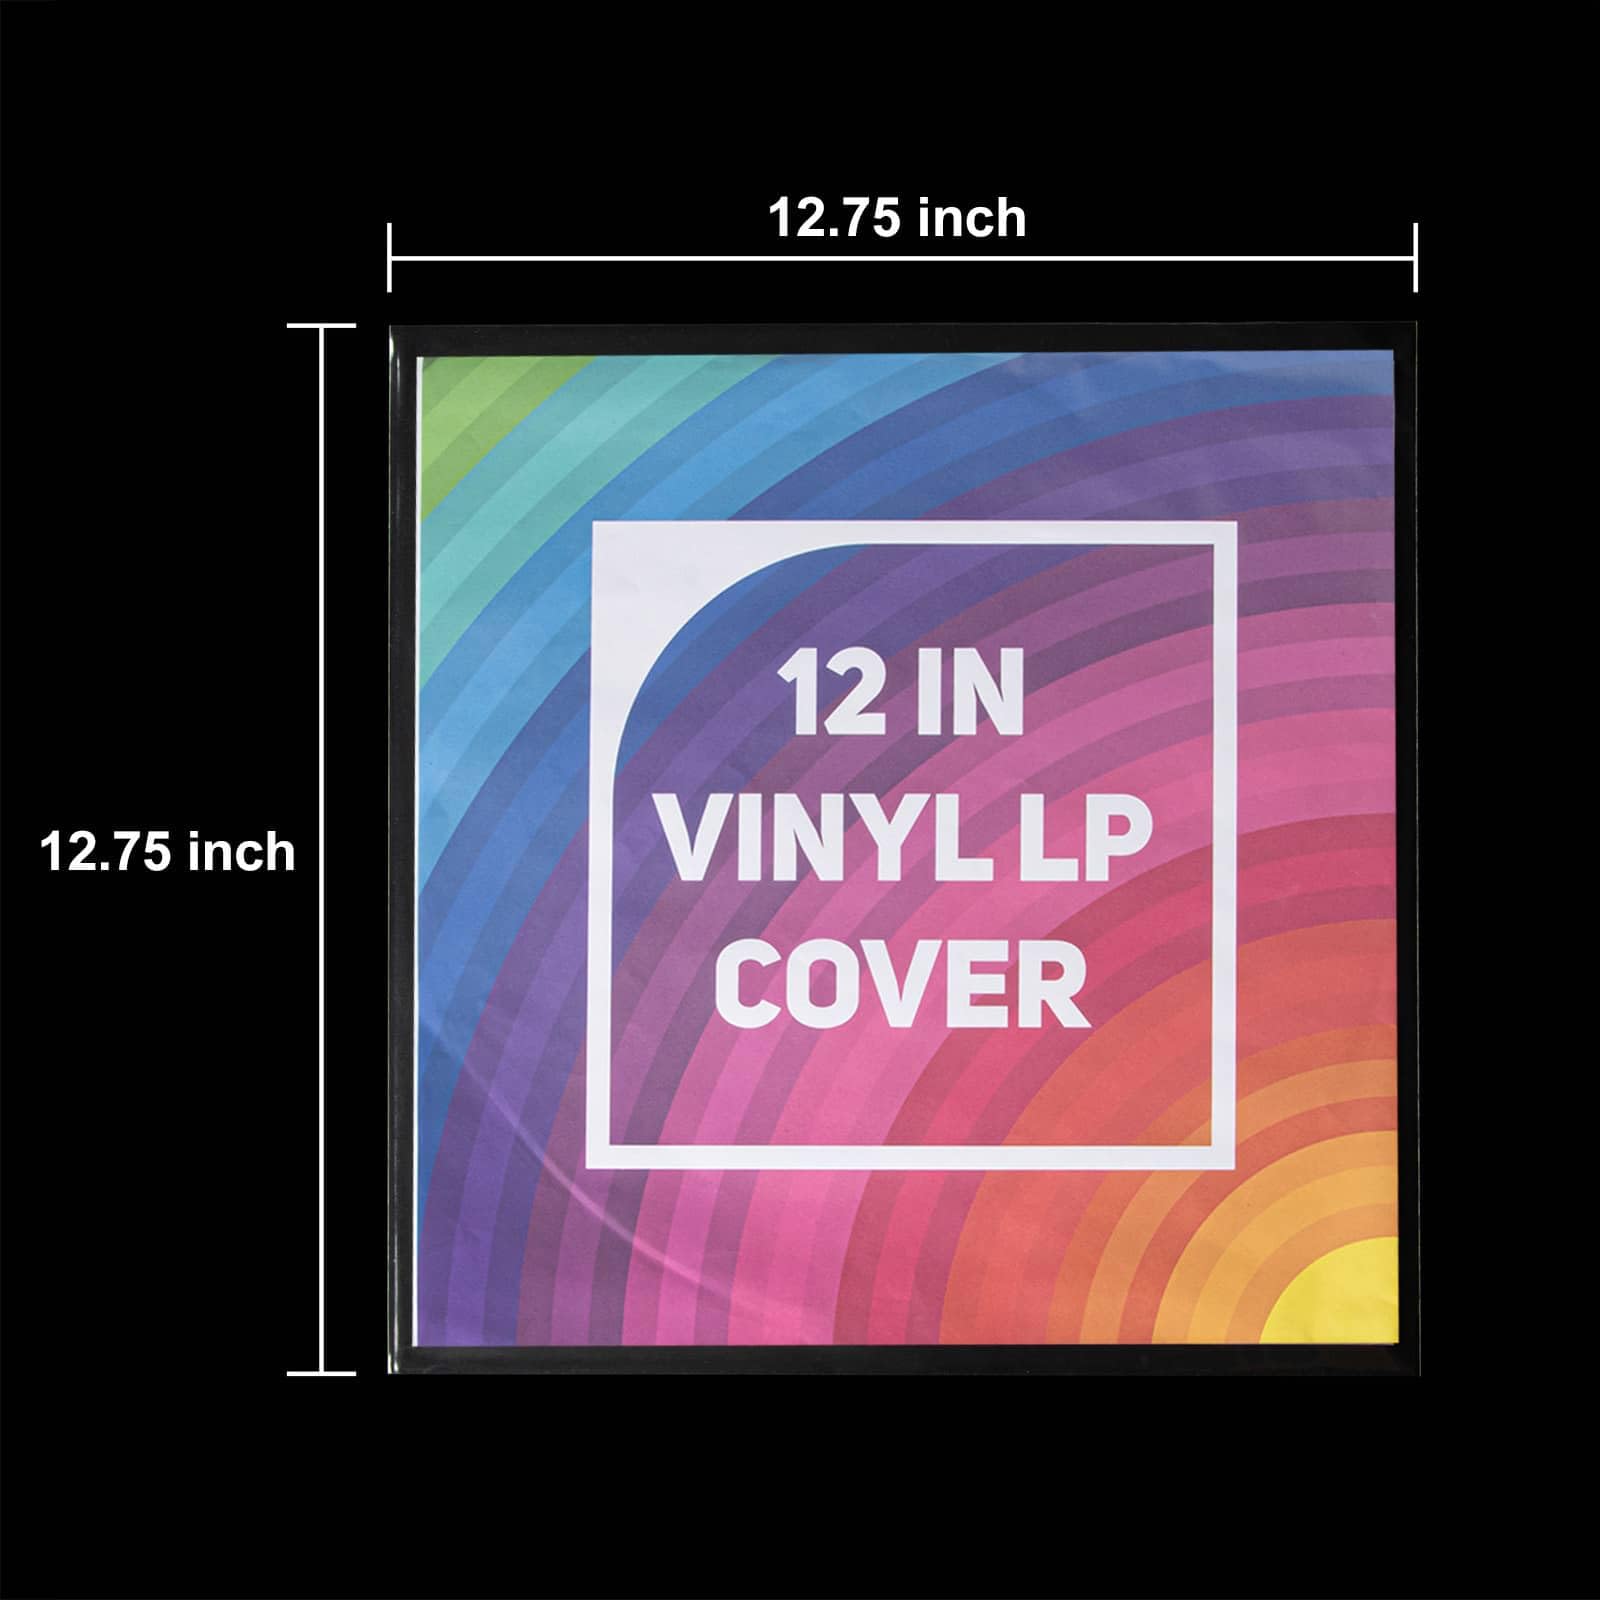 50-Pack 12-inch Vinyl-Record Outer Sleeves - LP Record Sleeves Album Covers, Clear Premium Polypropylene Vinyl Record Storage Protector, 3 mil Thick, Wrinkle Free, Fit for Single and Double LP Storage